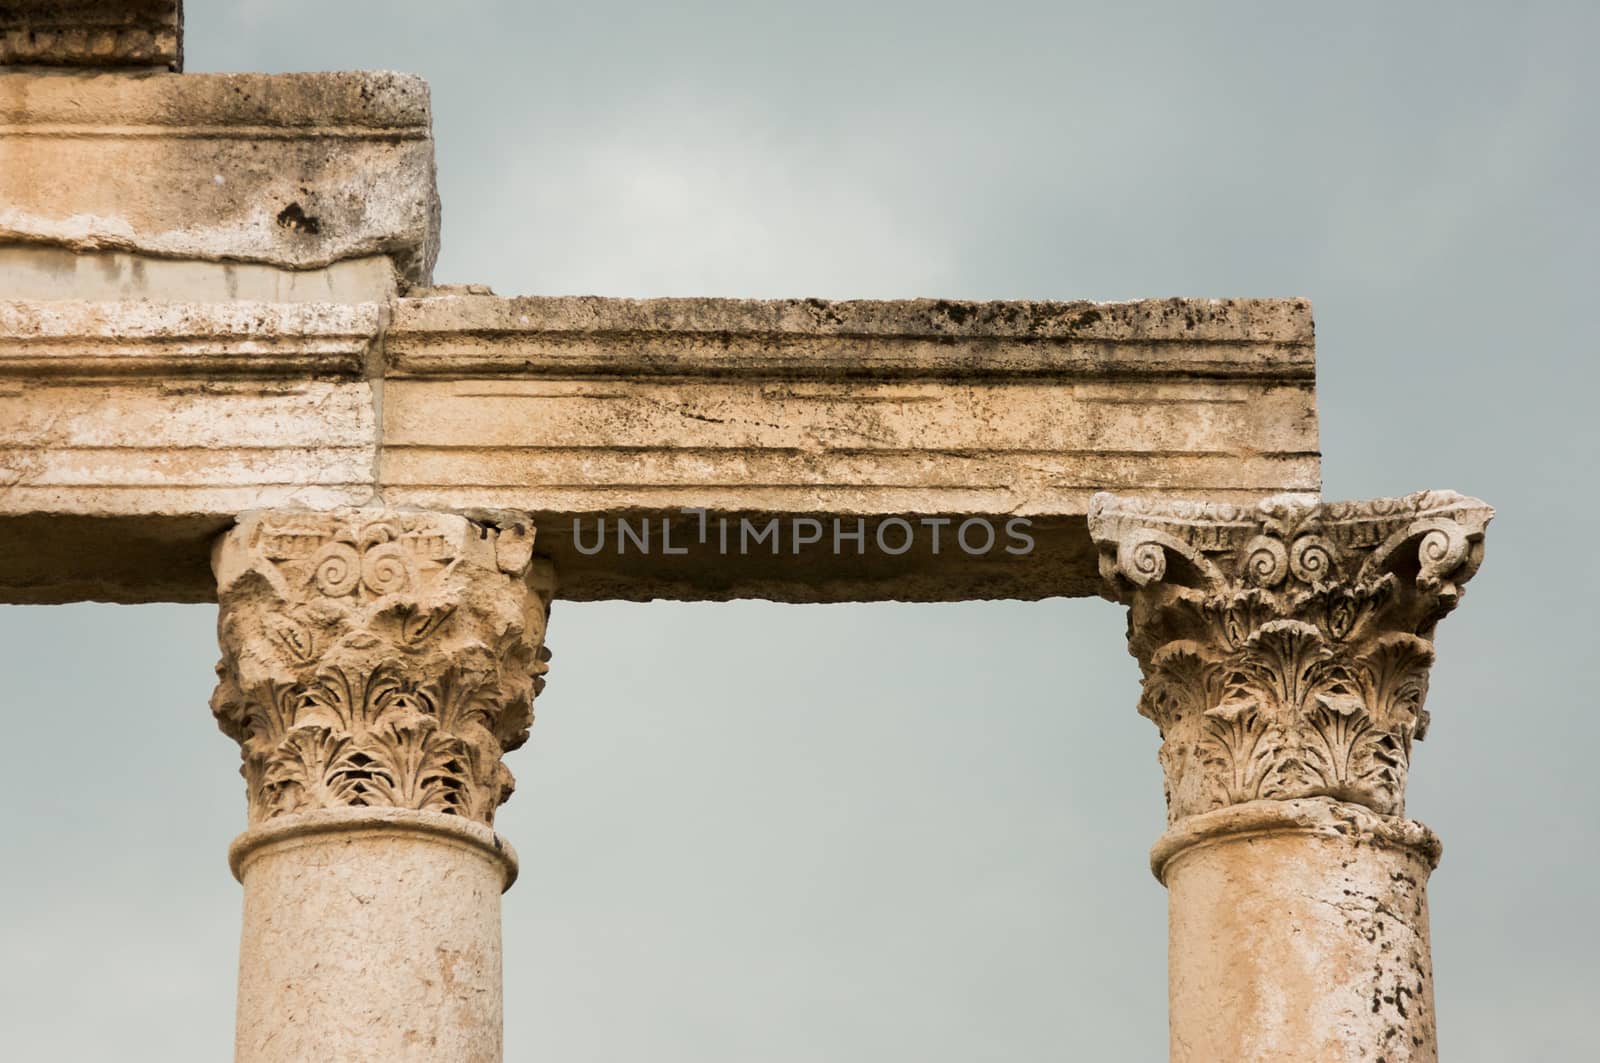 Apamea, Syria - May, 2009: Syria before the war. the Great Colonnade and triumphal arches in the impressive Apamea Greek and Roman city of Apamea in Syria. . Column tops the Corinthian order is the most ornate of the Greek orders, column having an ornate capital decorated with two rows of acanthus leaves.The site includes the famous Great Colonnade, one of the longest in the world. Because civil war in Syria that started in 2011 the Apamea ruins have been damaged and looted by treasure hunters.